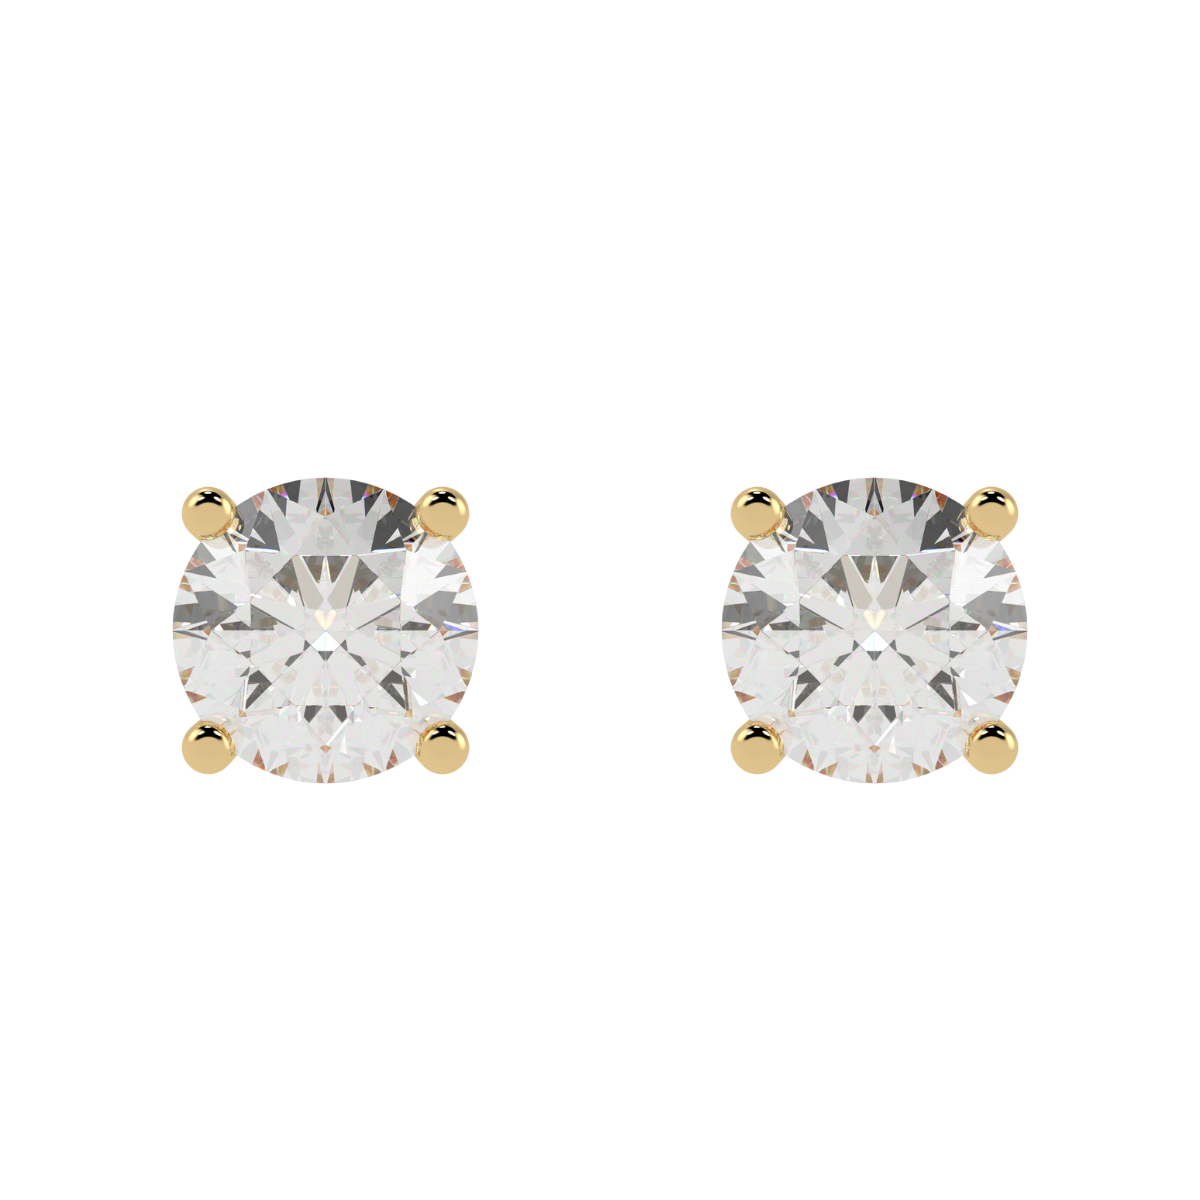 Round Solitaire Earrings